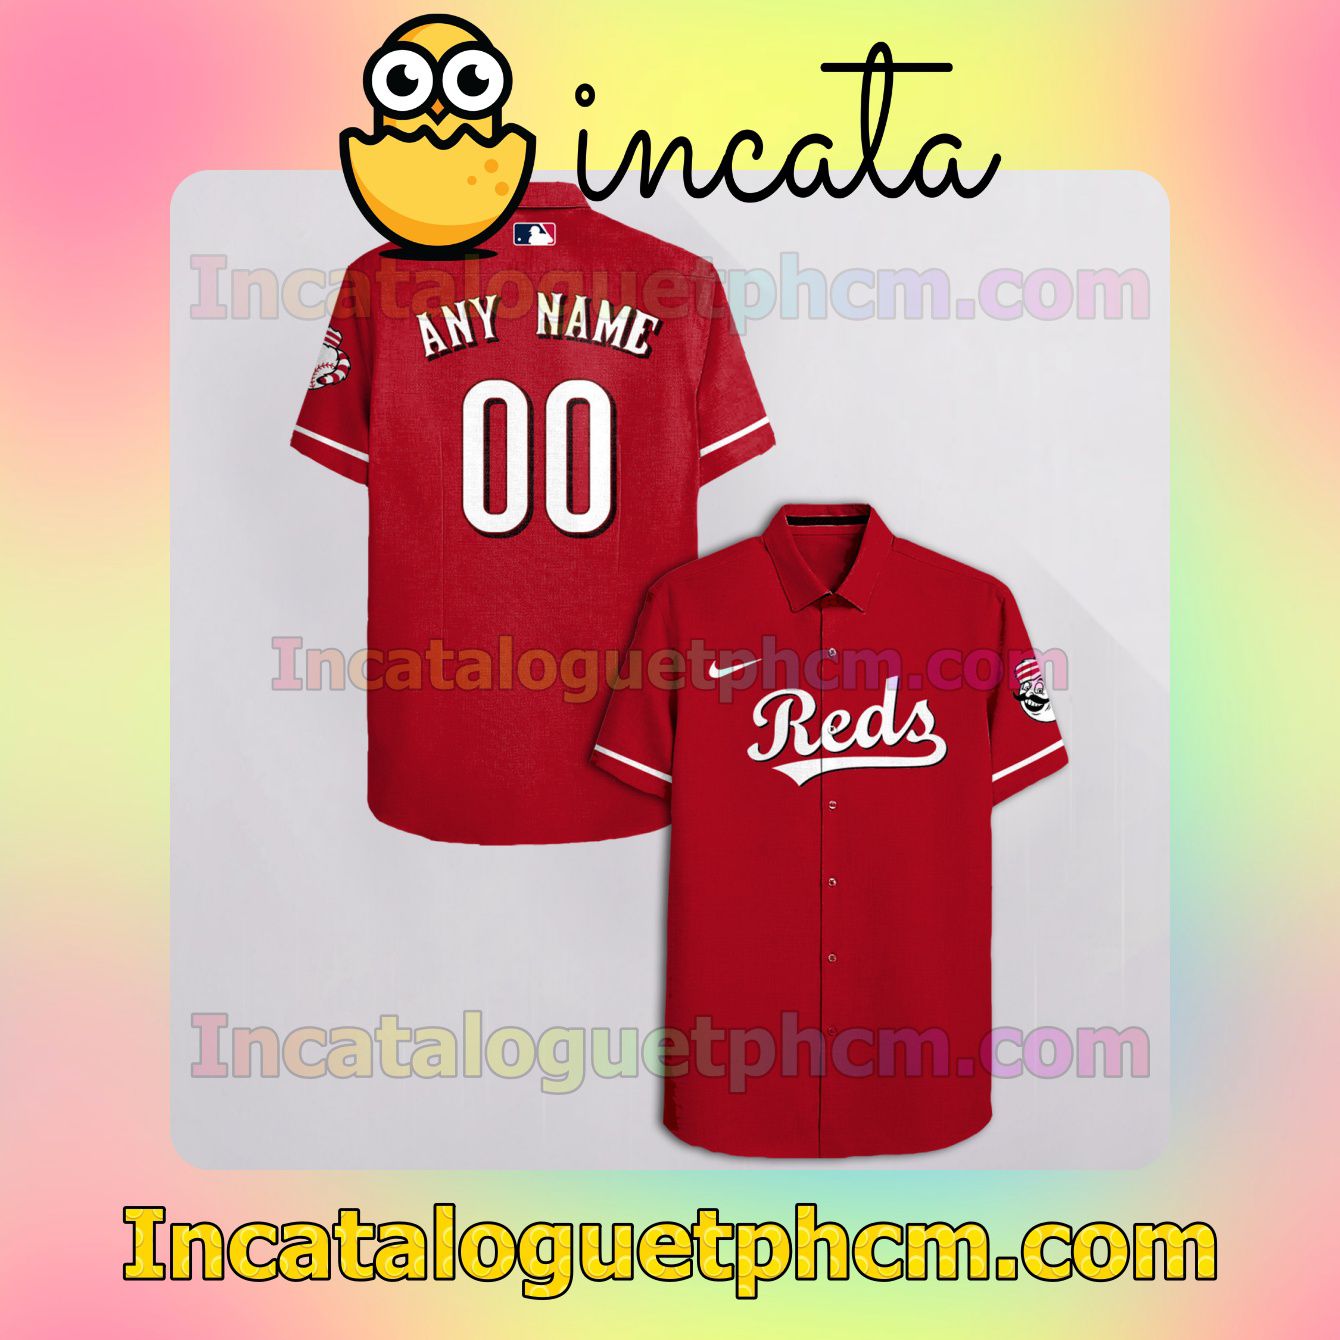 Personalized Cincinnati Reds Red Packer Lover Button Shirt And Swim Trunk